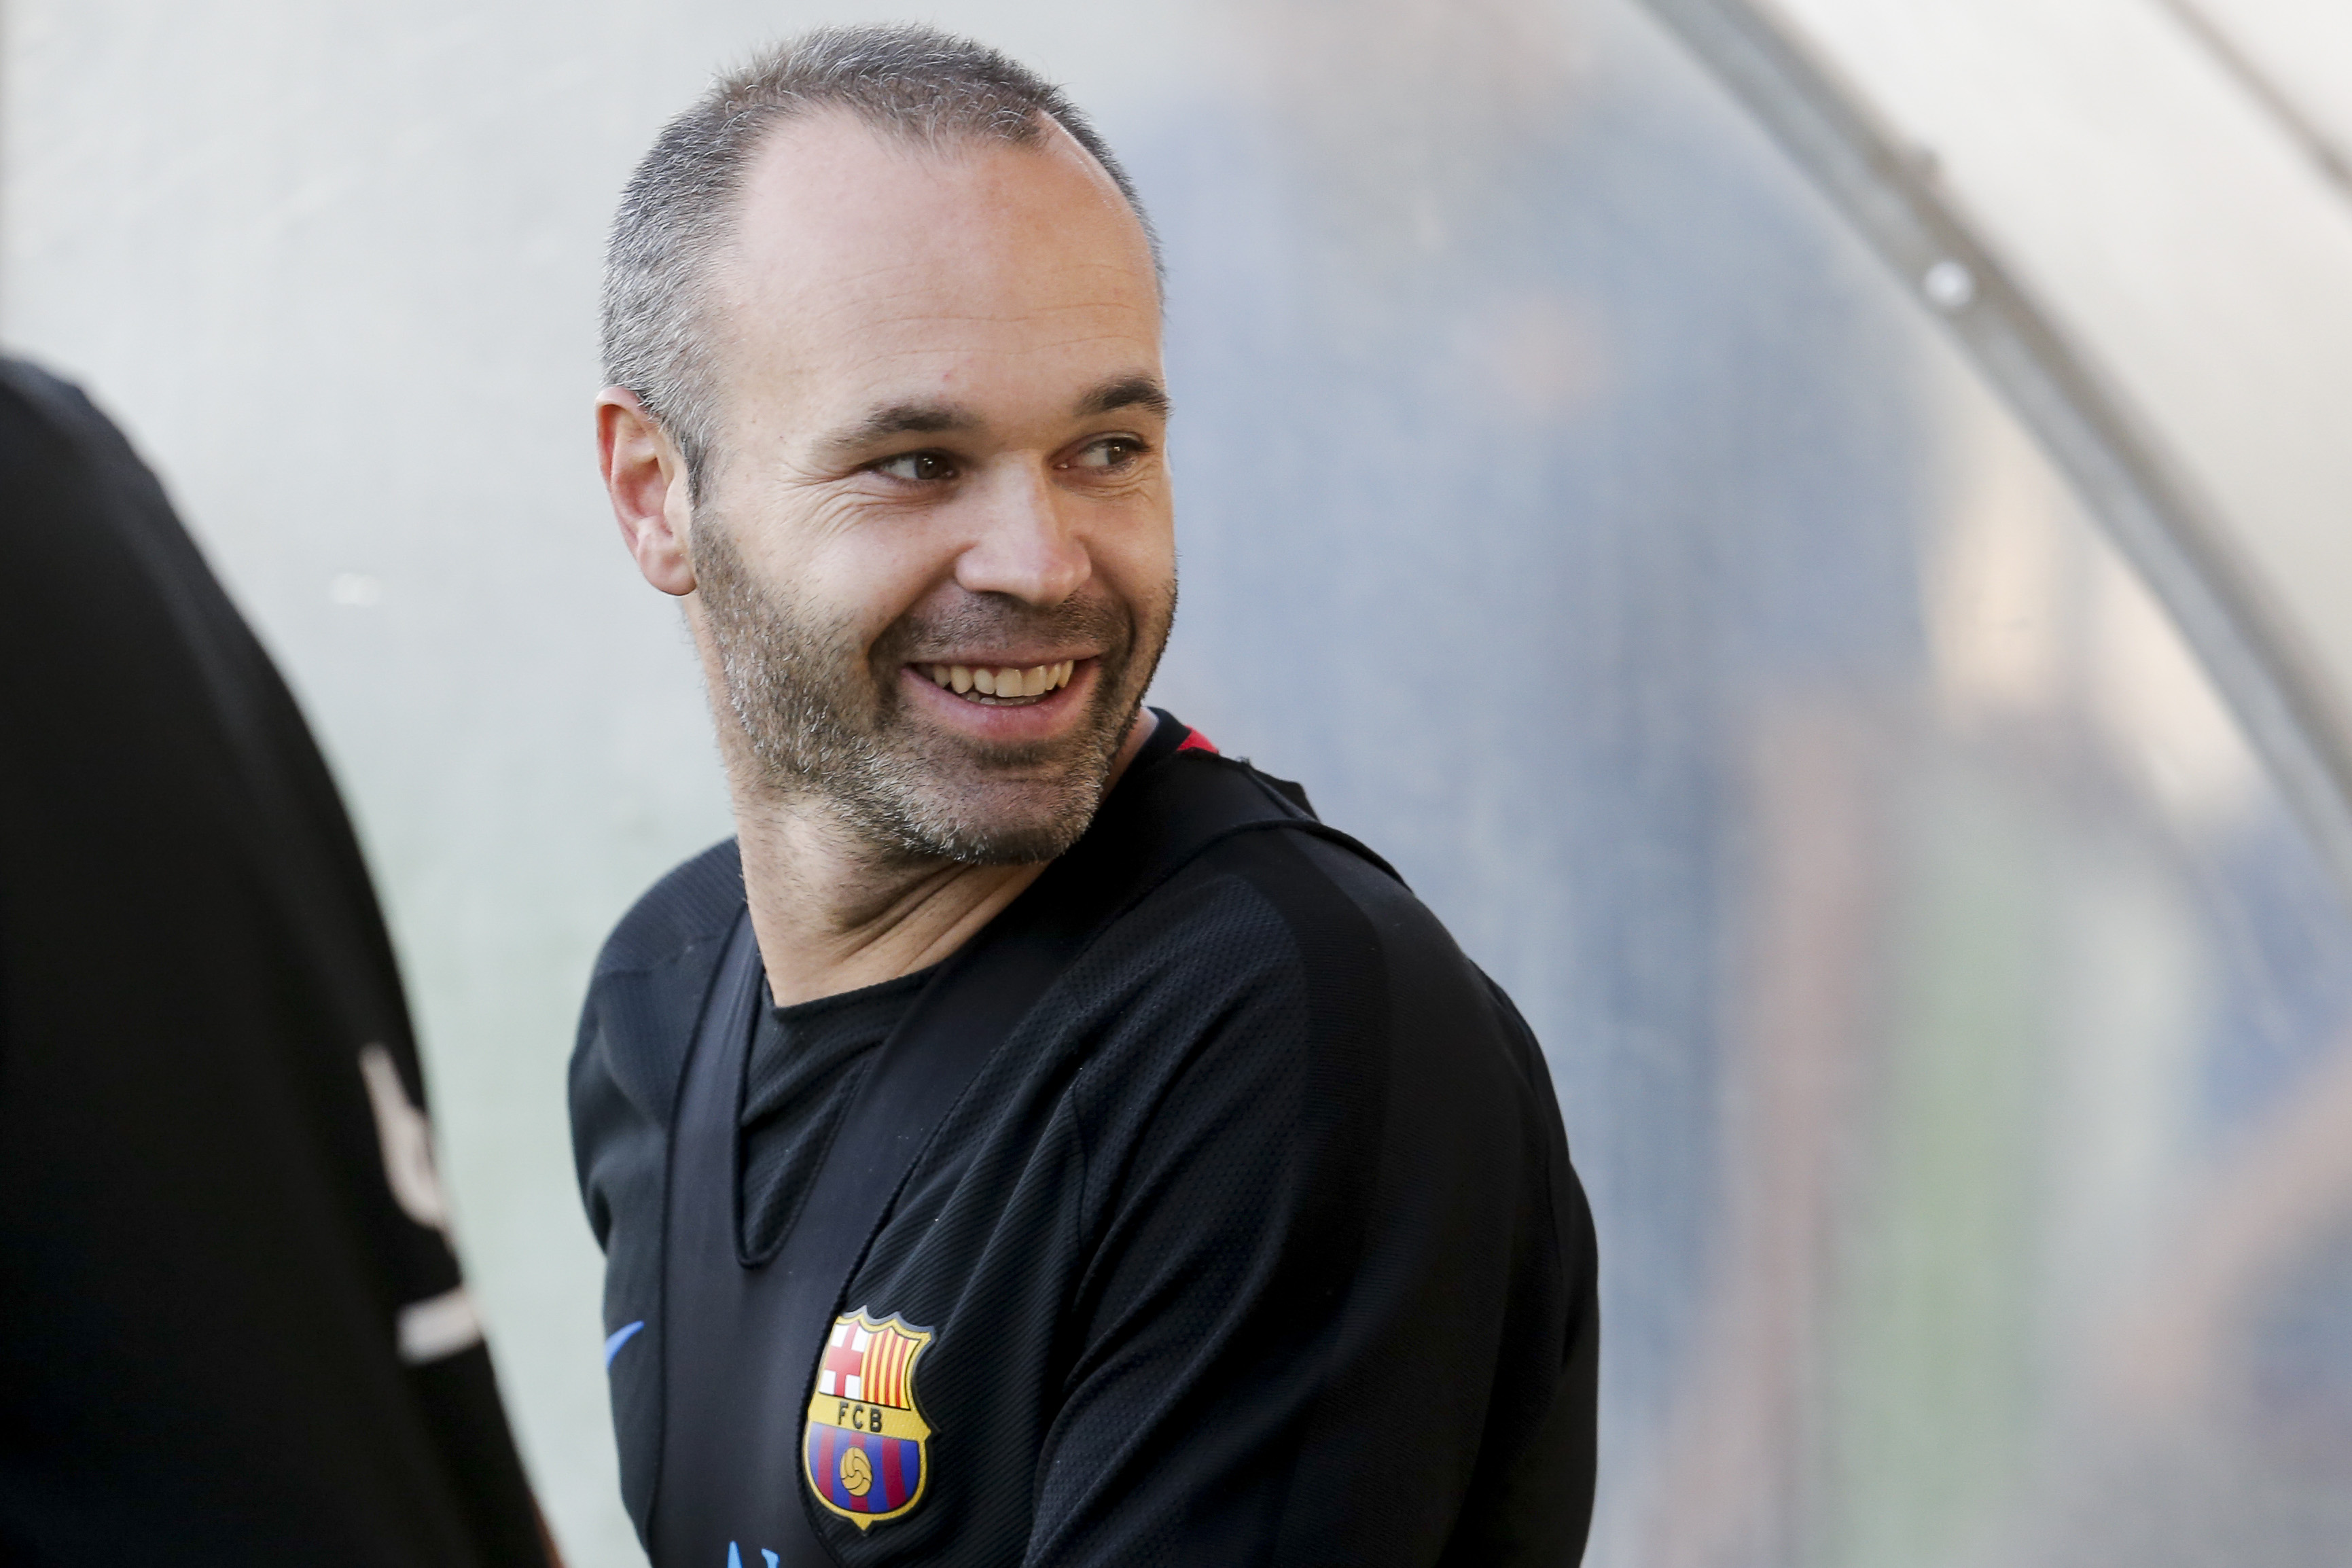 Barcelona's Spanish midfielder Andres Iniesta smiles as he arrives at a training session at the Joan Gamper Sports Center in Sant Joan Despi, near Barcelona on October 13, 2017, on the eve of a Spanish League football match against Club Atletico de Madrid. / AFP PHOTO / PAU BARRENA        (Photo credit should read PAU BARRENA/AFP/Getty Images)